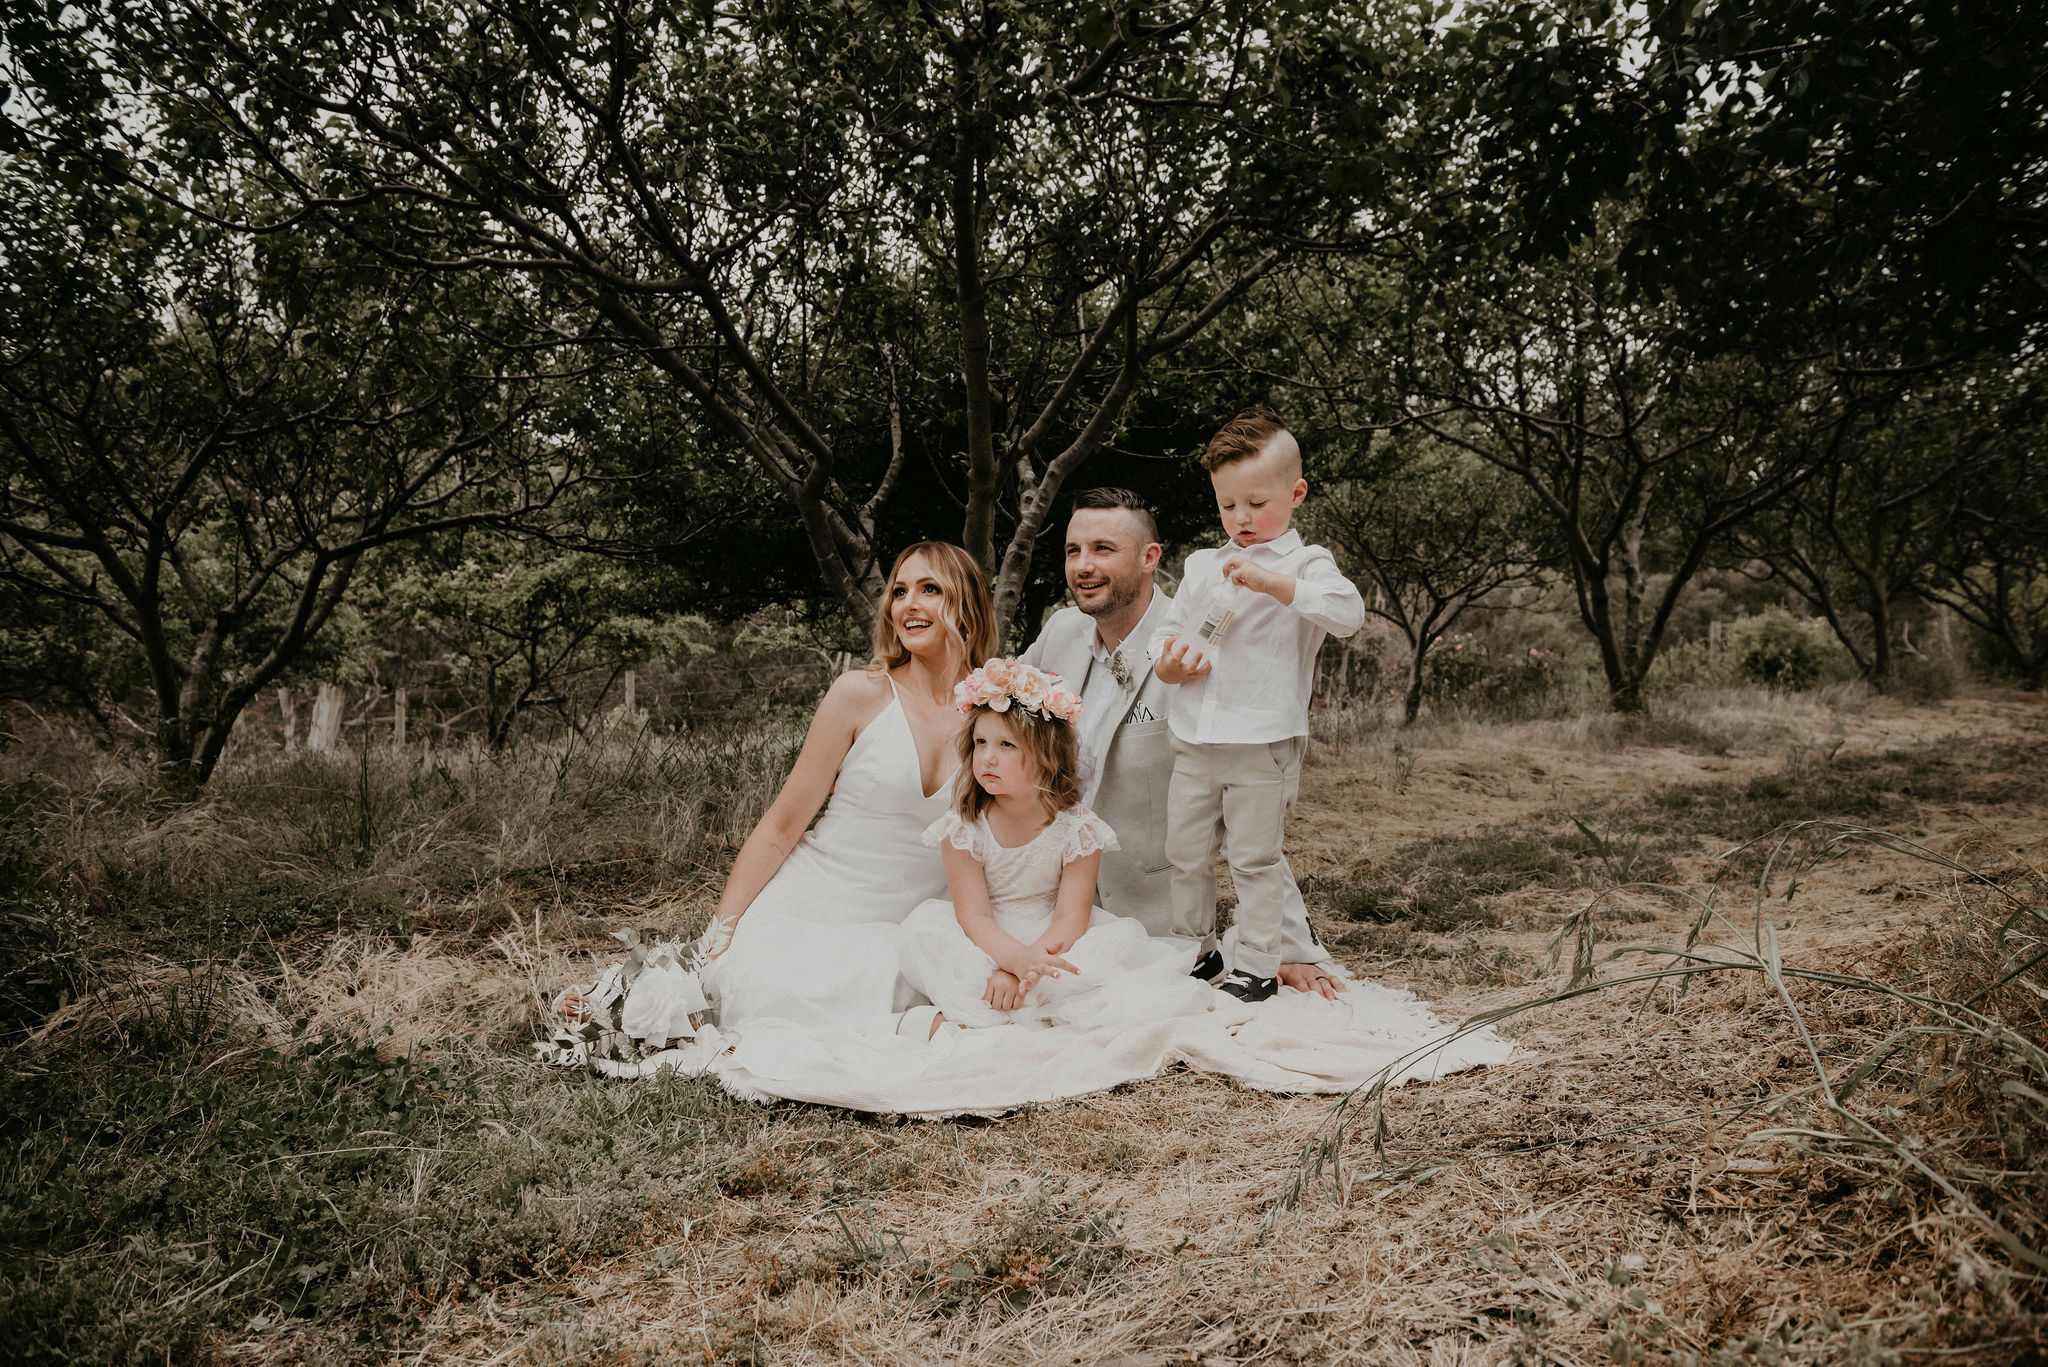 Elope with kids Lets Elope Melbourne Celebrant Photographer Elopement Package Victoria Sarah Matler Photography Orchard Farm Vigano weddings intimate